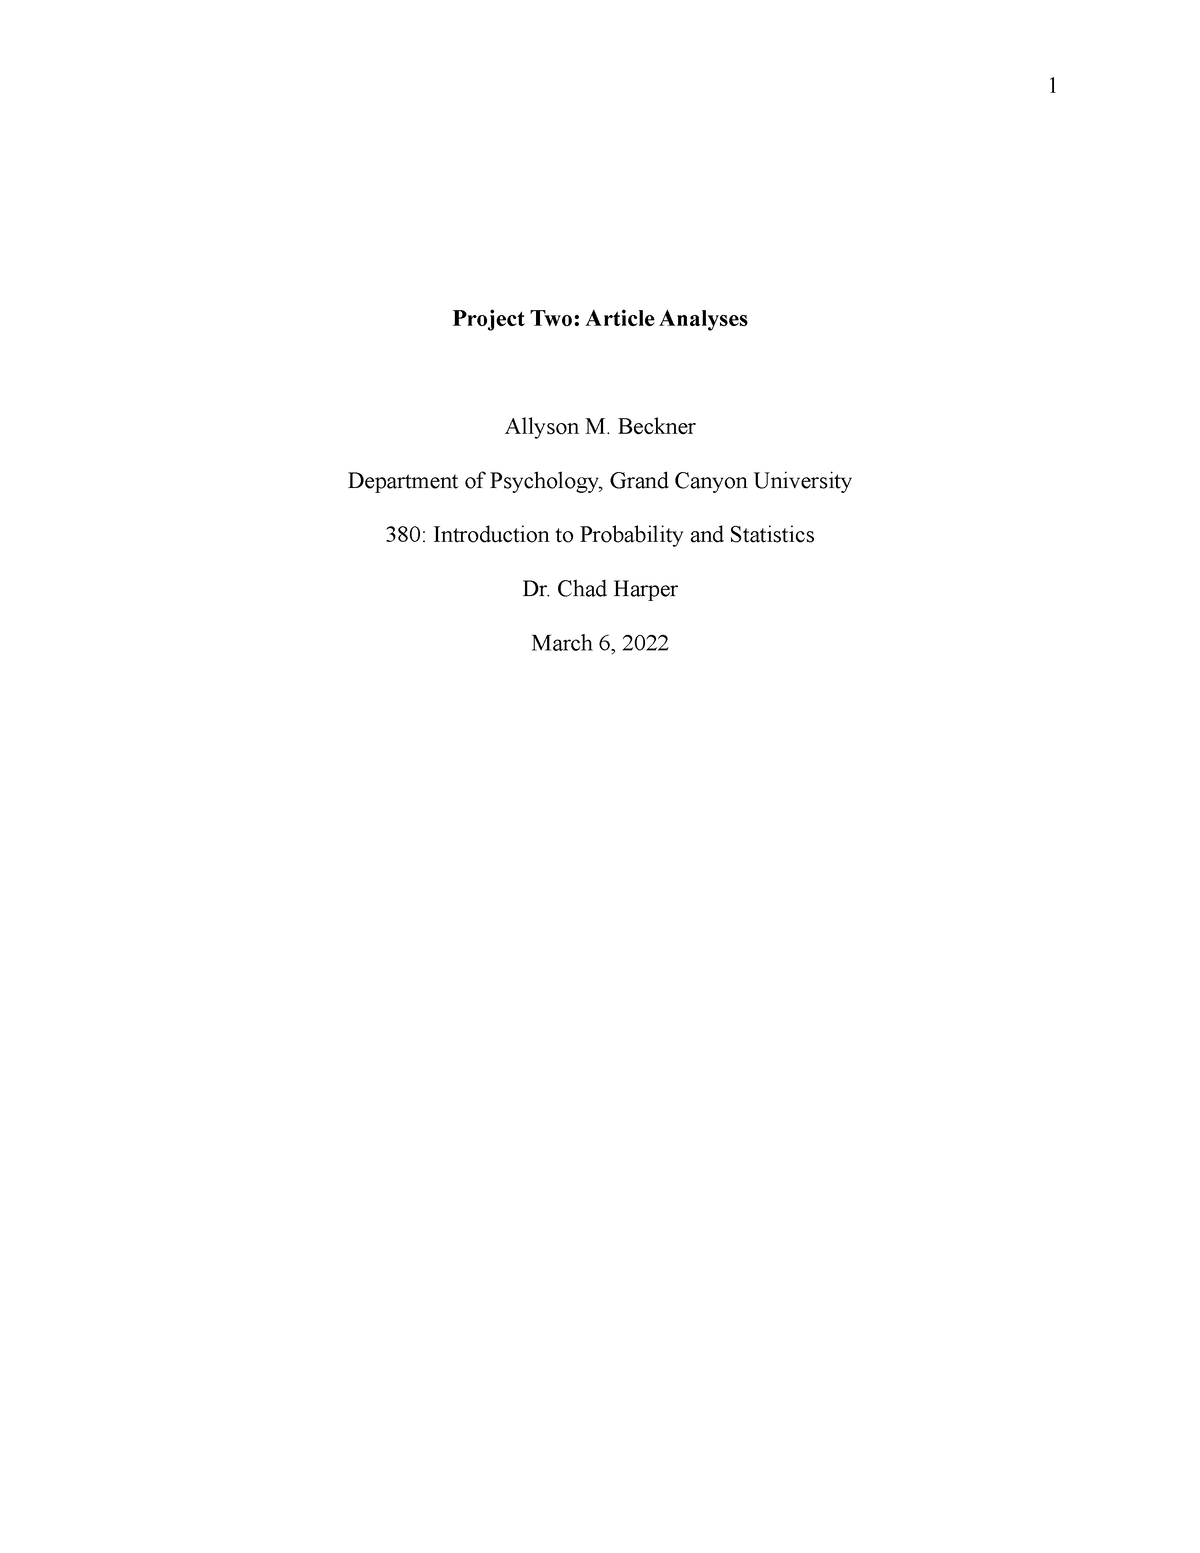 apa title page template 2022